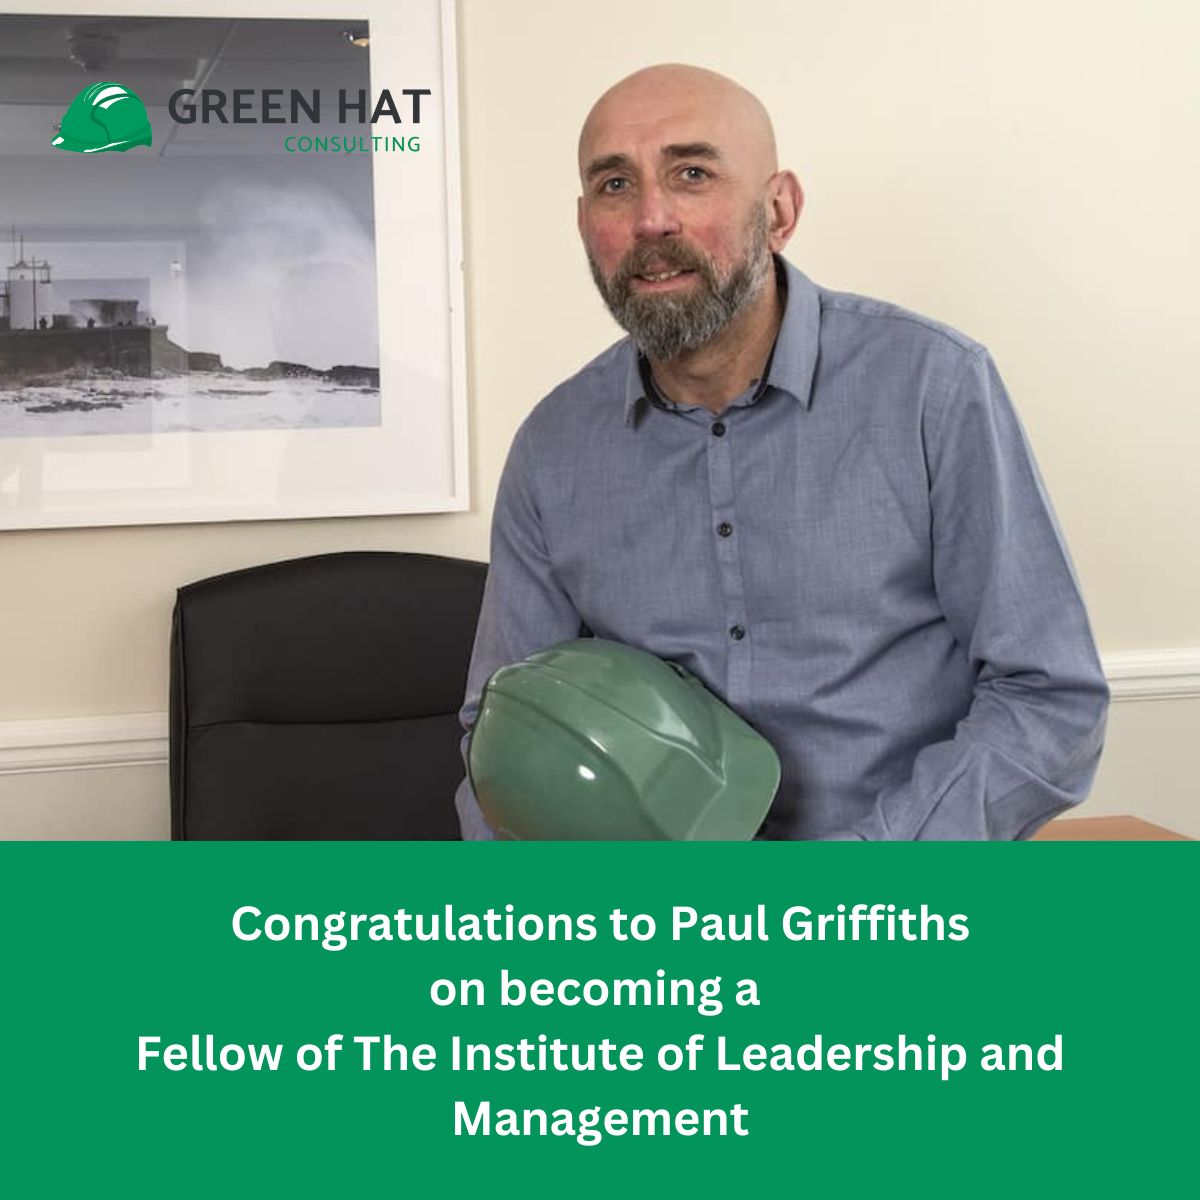 Congratulations to Paul Griffiths our Associate Director and Head of Health Safety and Environment on becoming a Fellow of the Institute of Leadership and Management! 
We applaud your achievement and wish you continued success. 👏 👏 👏
#leadershipandmanagement #healthandsafety